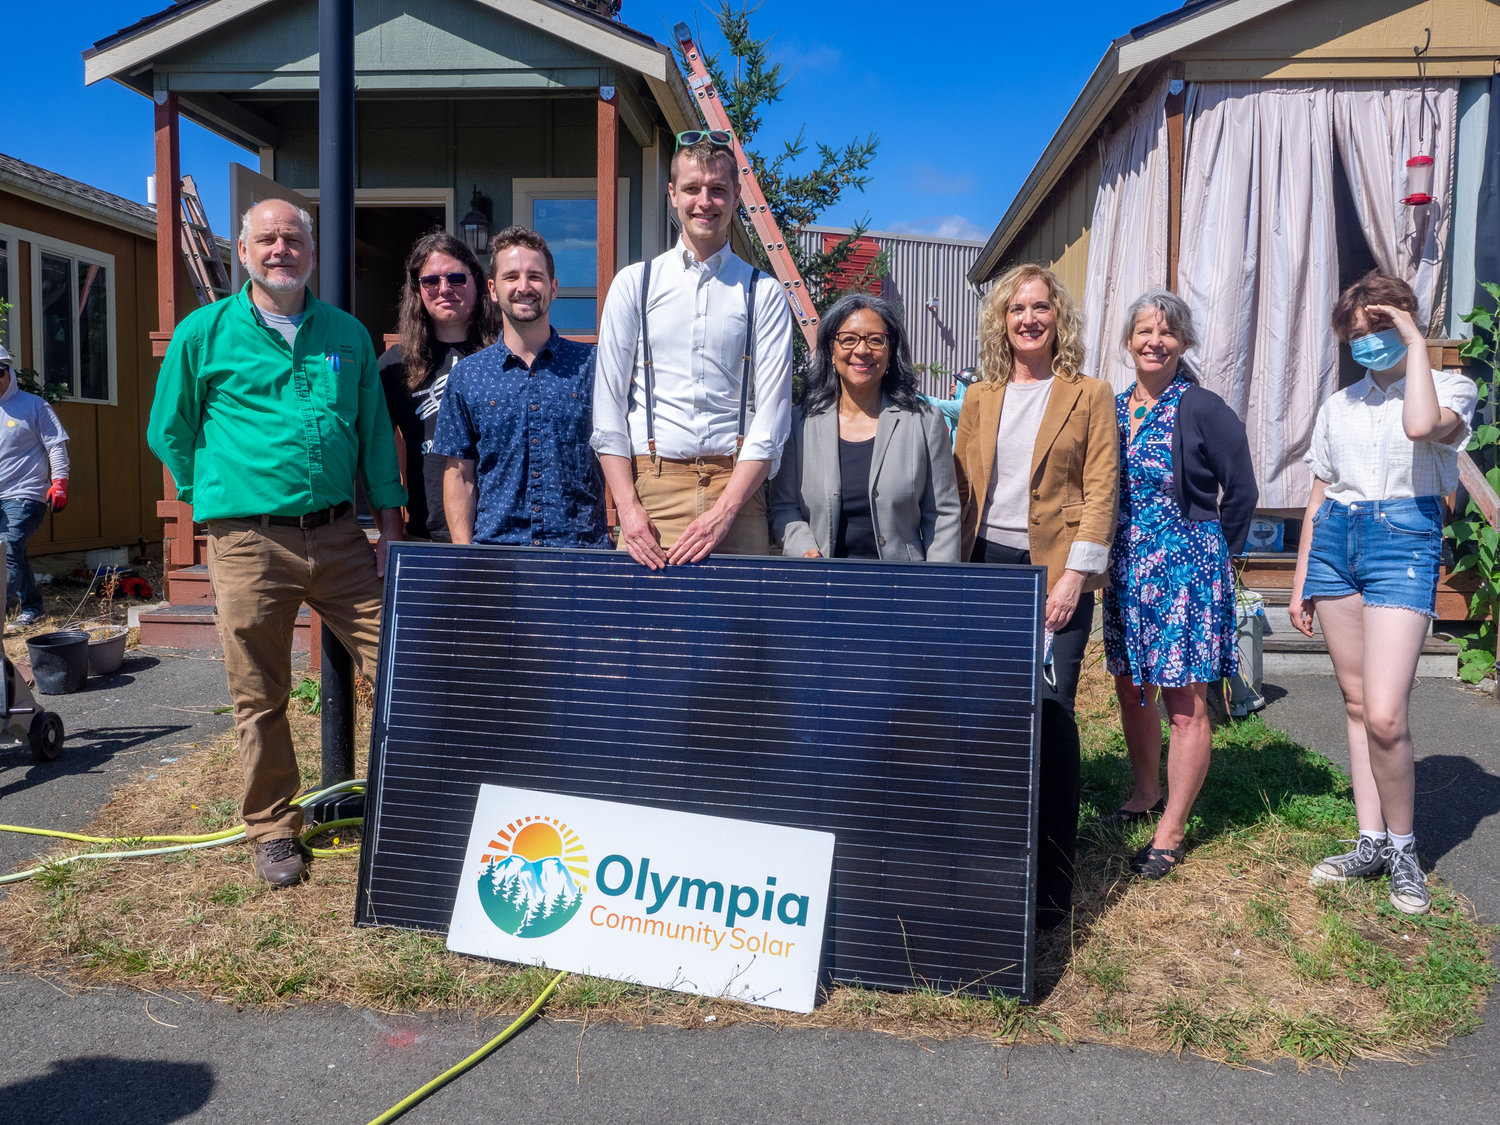 Standing with one of the solar panels about to be installed at the Quixote Village, are Congresswoman Marilyn Strickland, the leaders of the Olympia Community Solar, Quixote Village, and South Sound Solar.